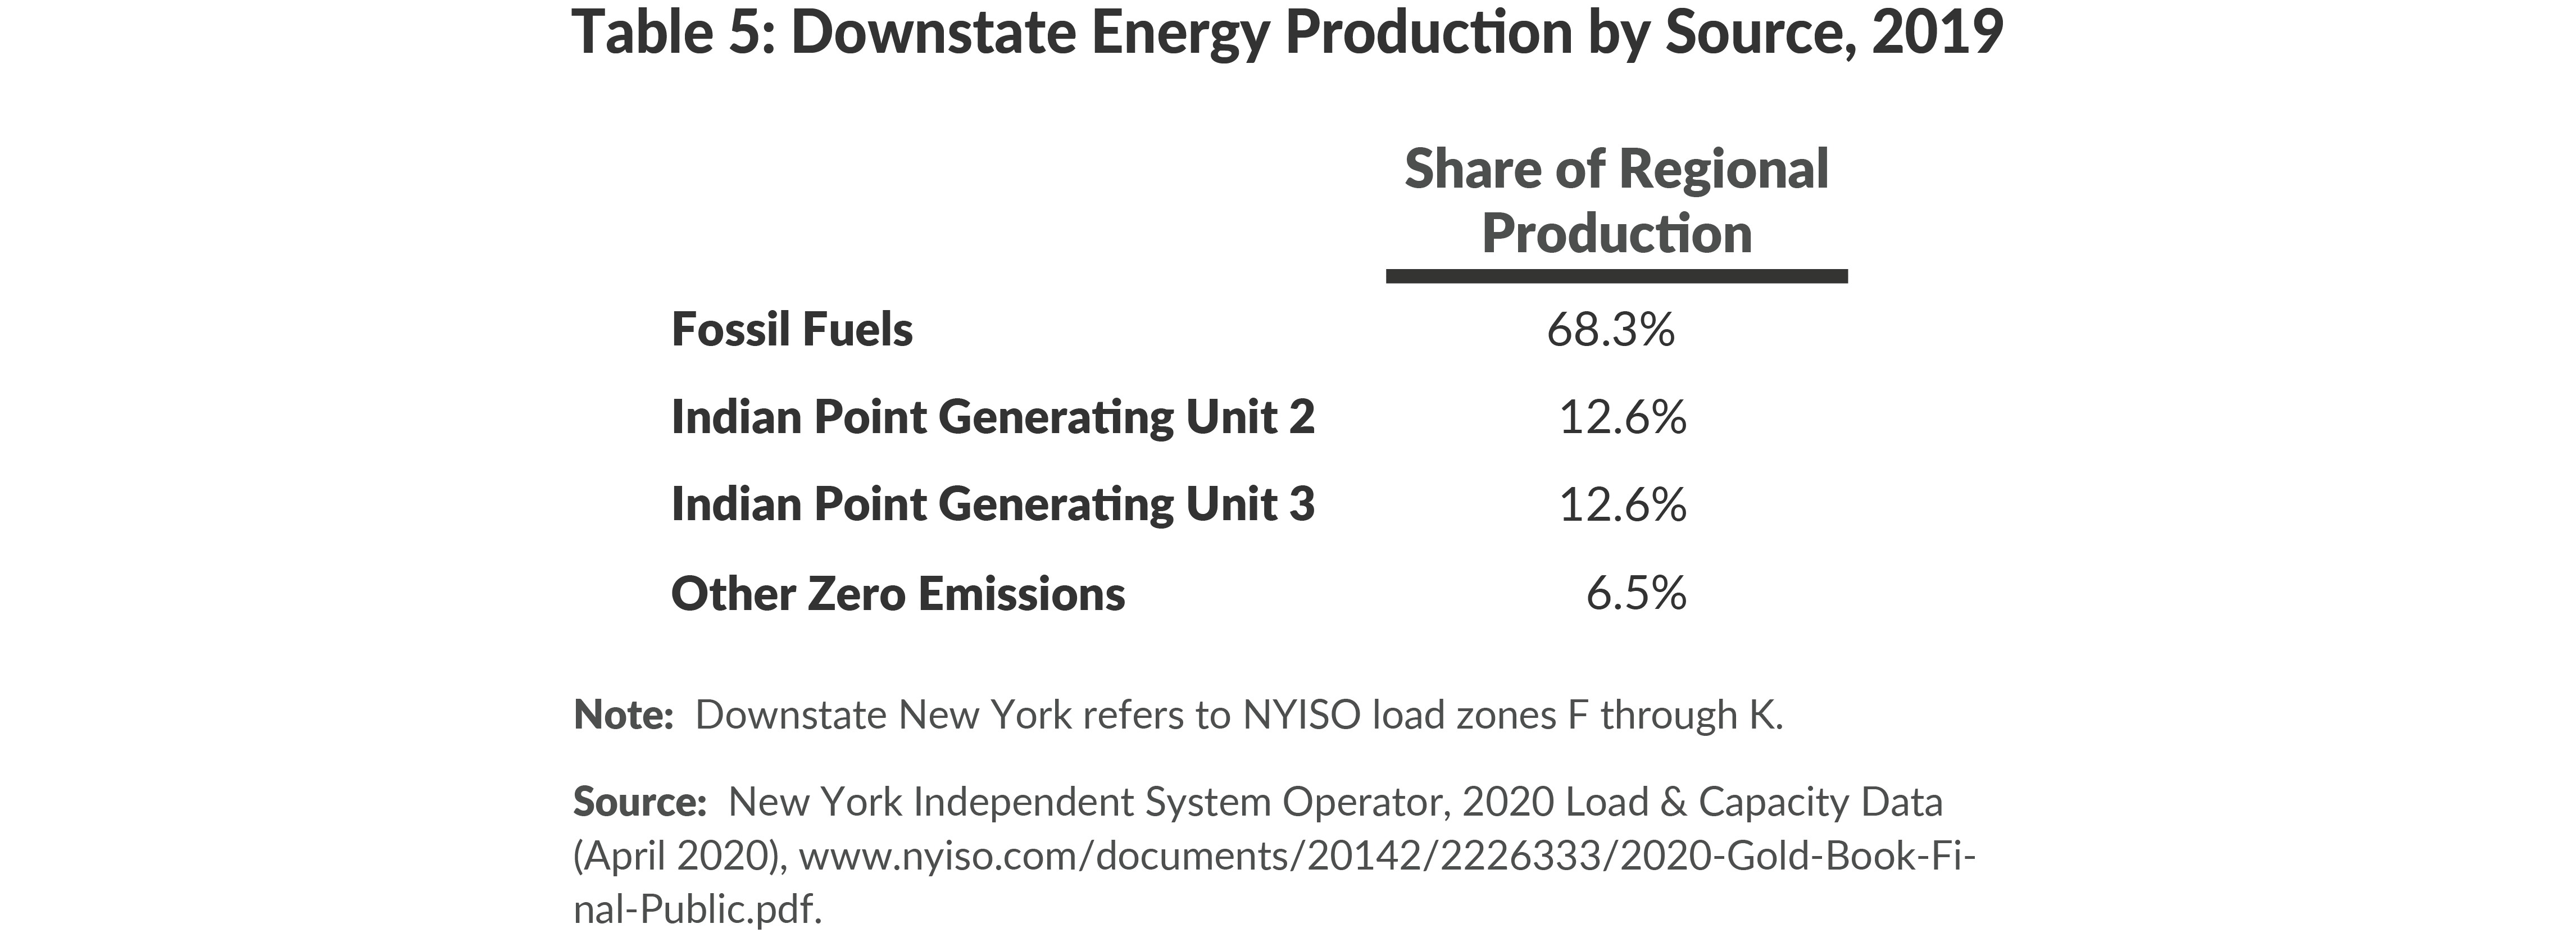 Table 5. Downstate Energy Production by Source, 2019